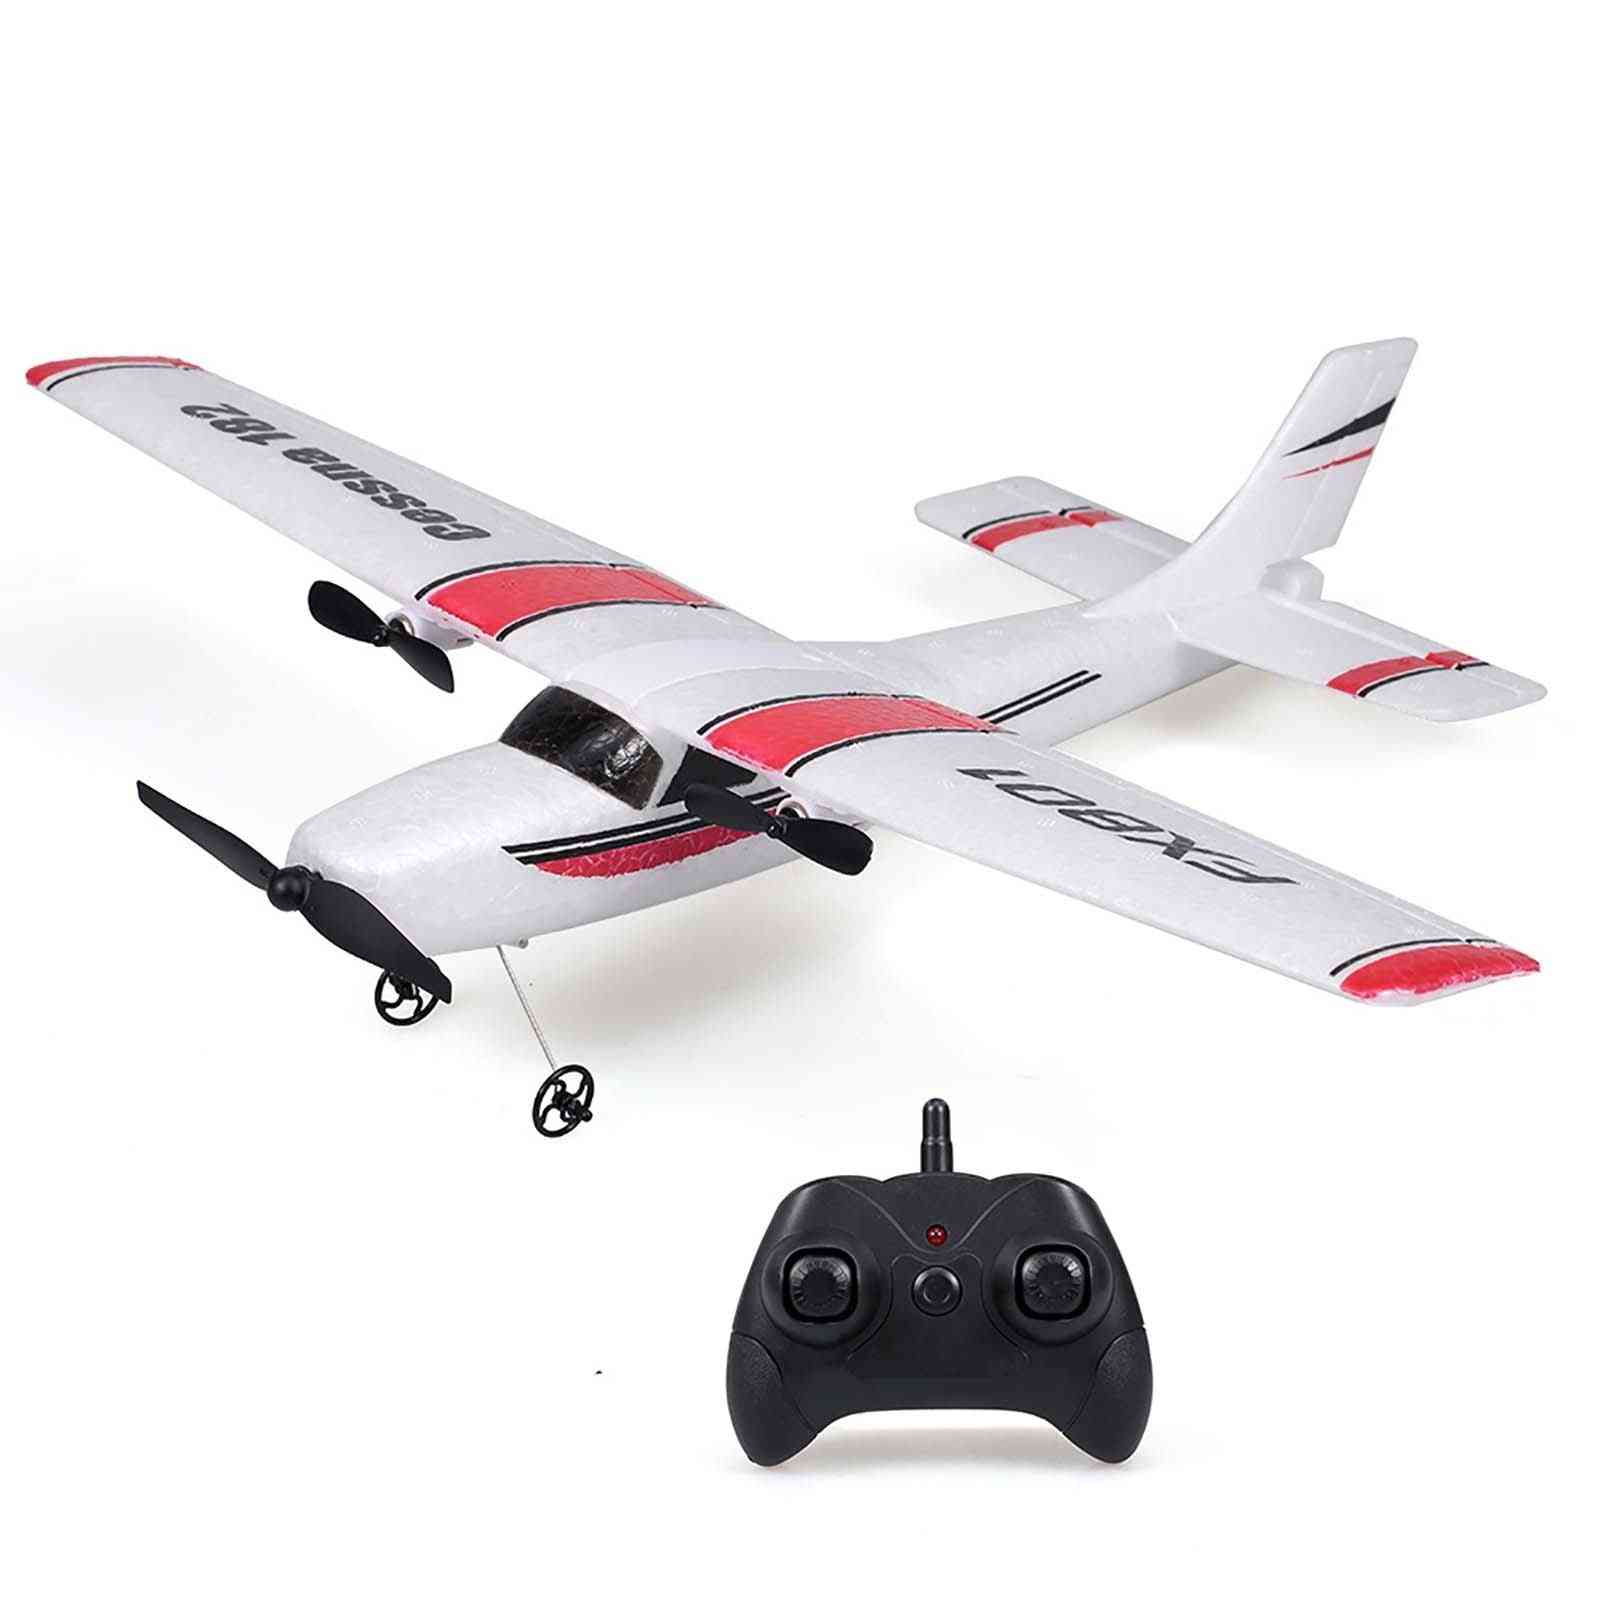 Rc Plane, Airplane Durable, Outdoor Aircraft Model For Beginner